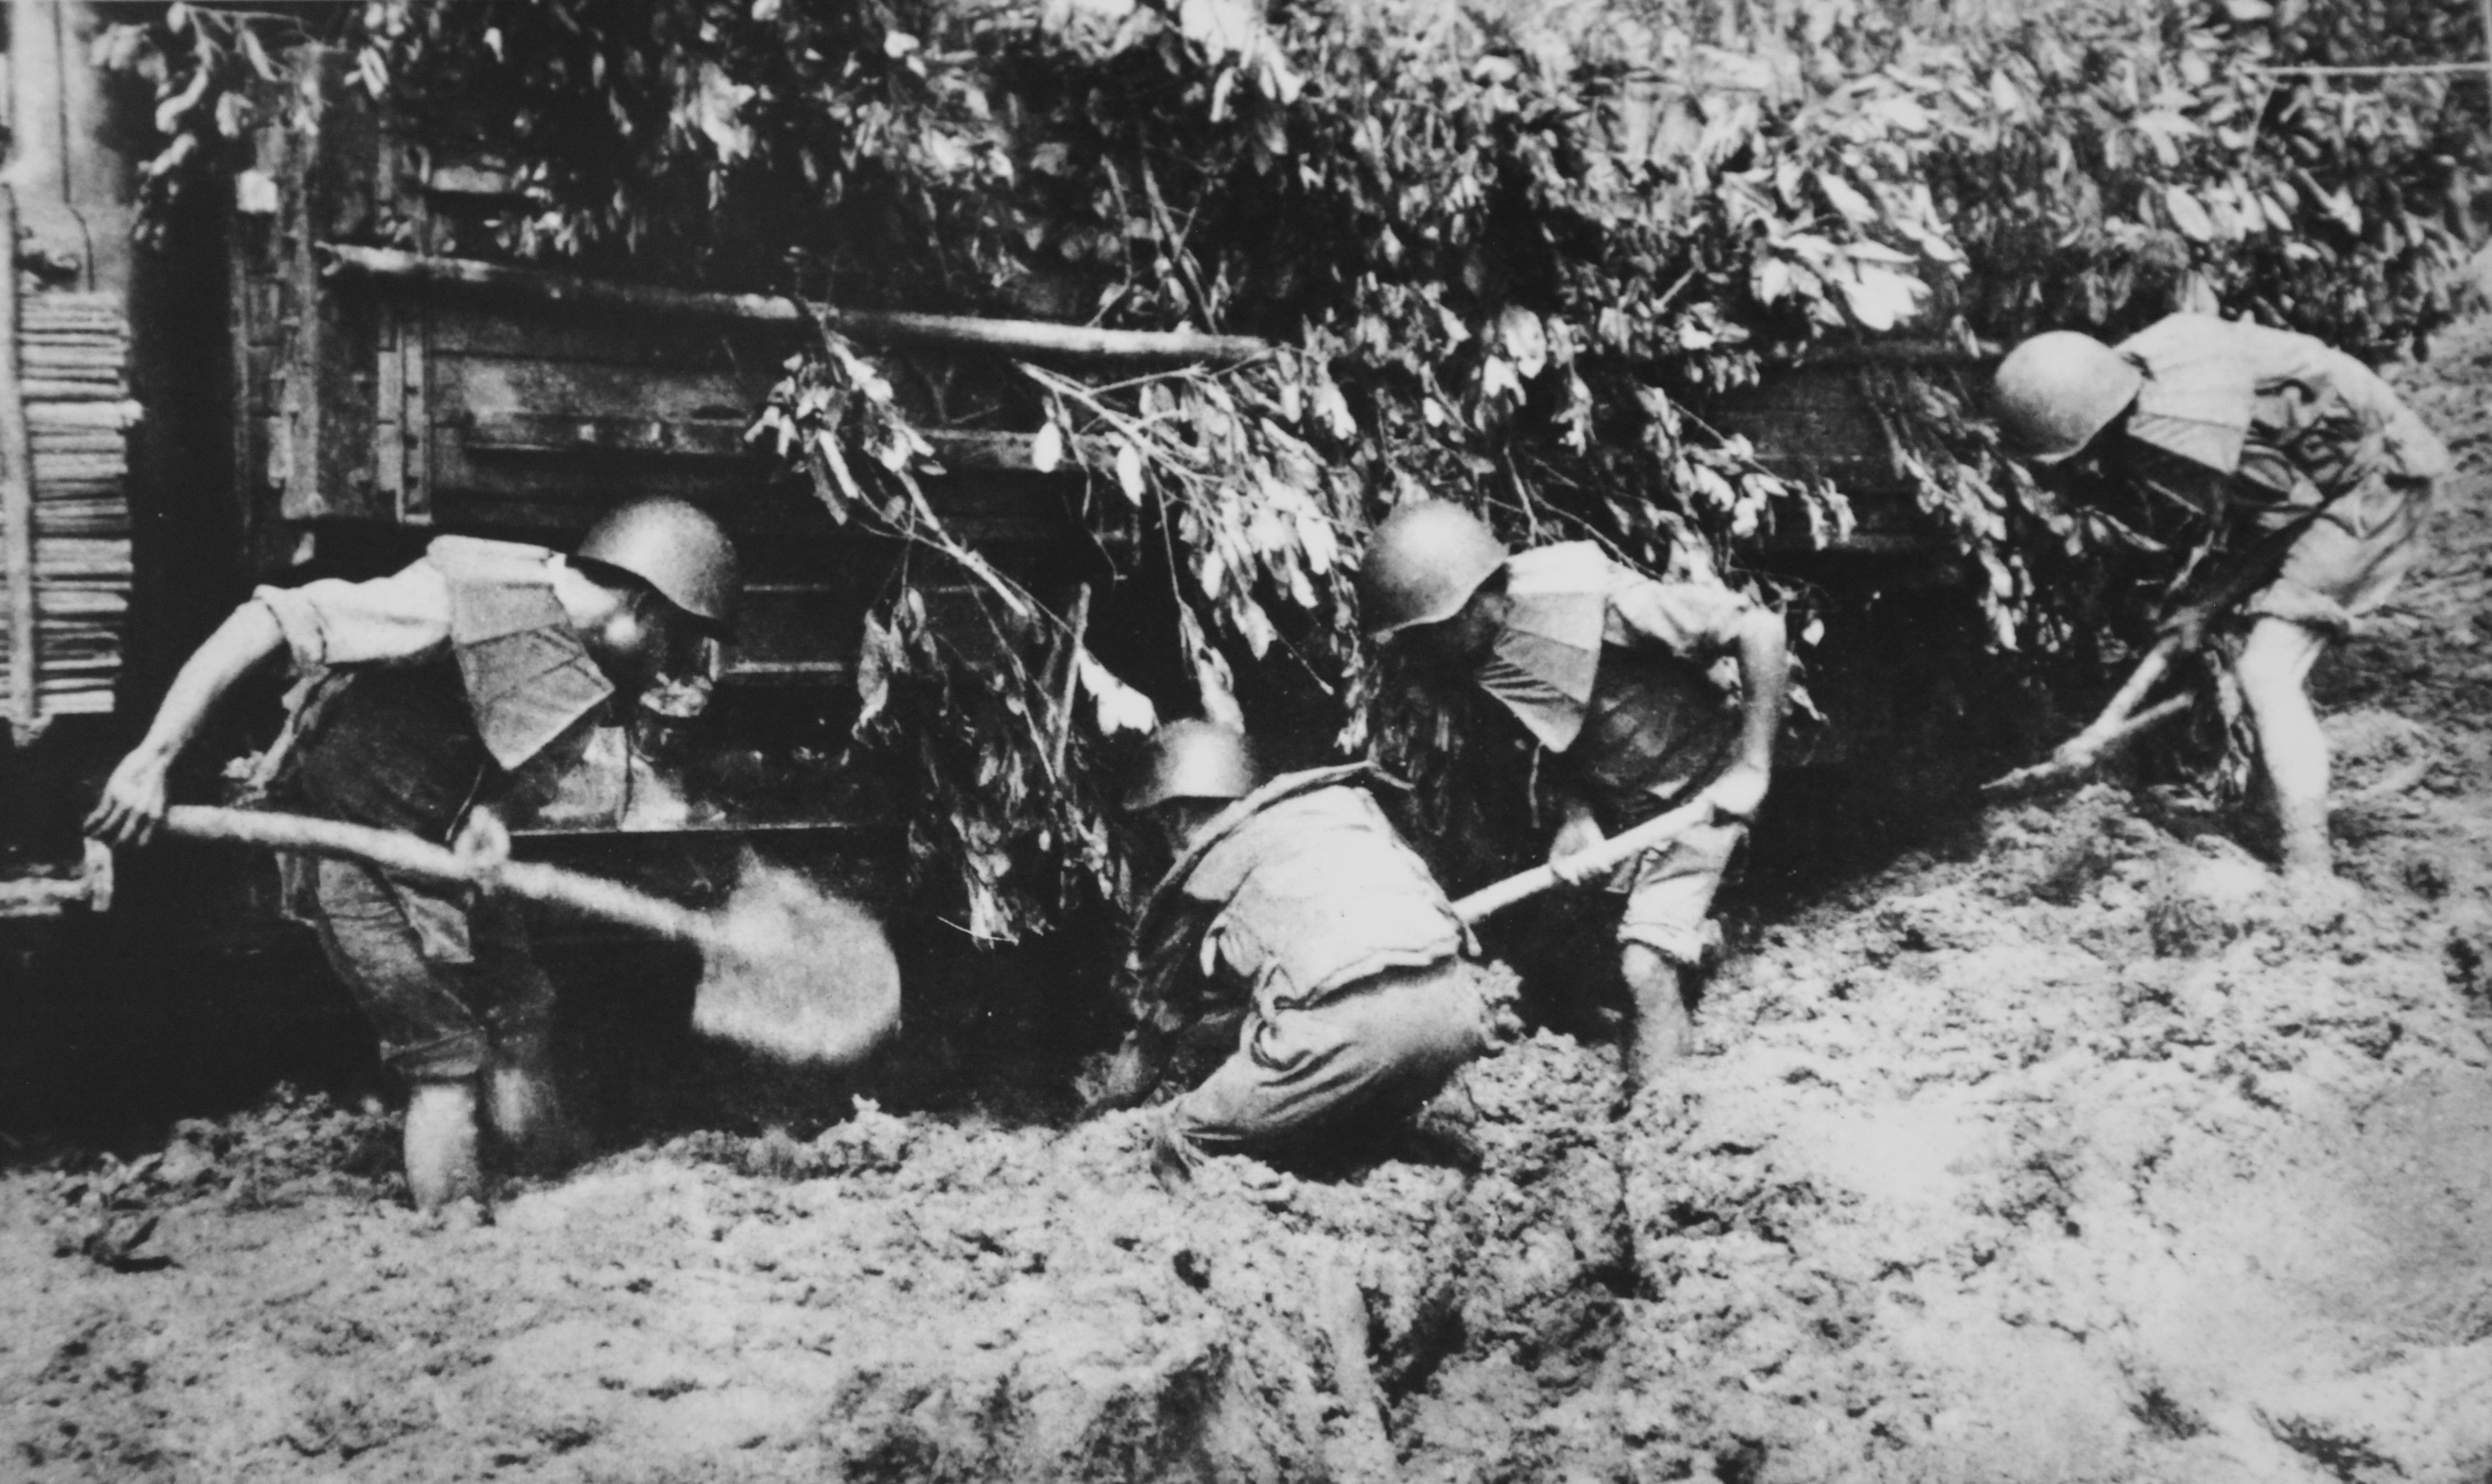 Vietnamese soldiers digging with shovels